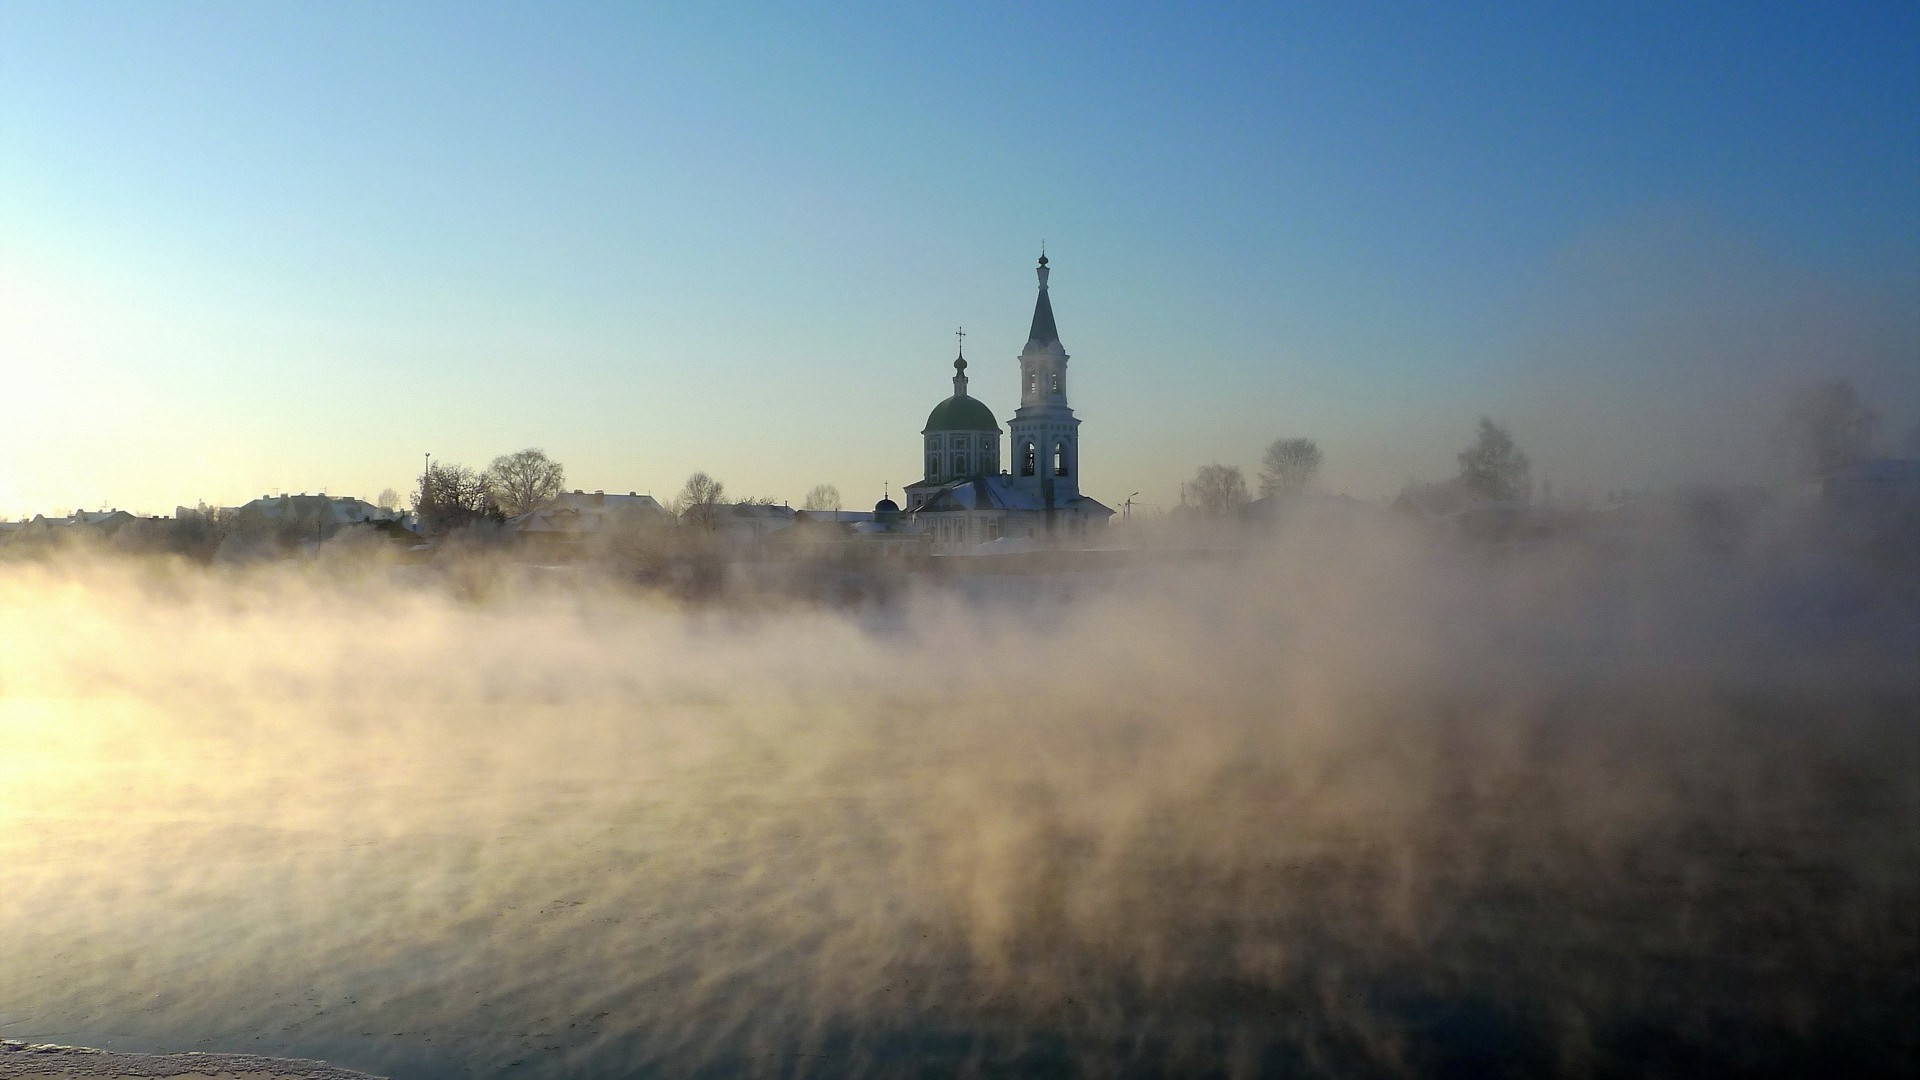 nature, Landscape, Architecture, Building, Old Building, Trees, Church, Cathedral, Mist, Morning, Clear Sky, Cross Wallpaper